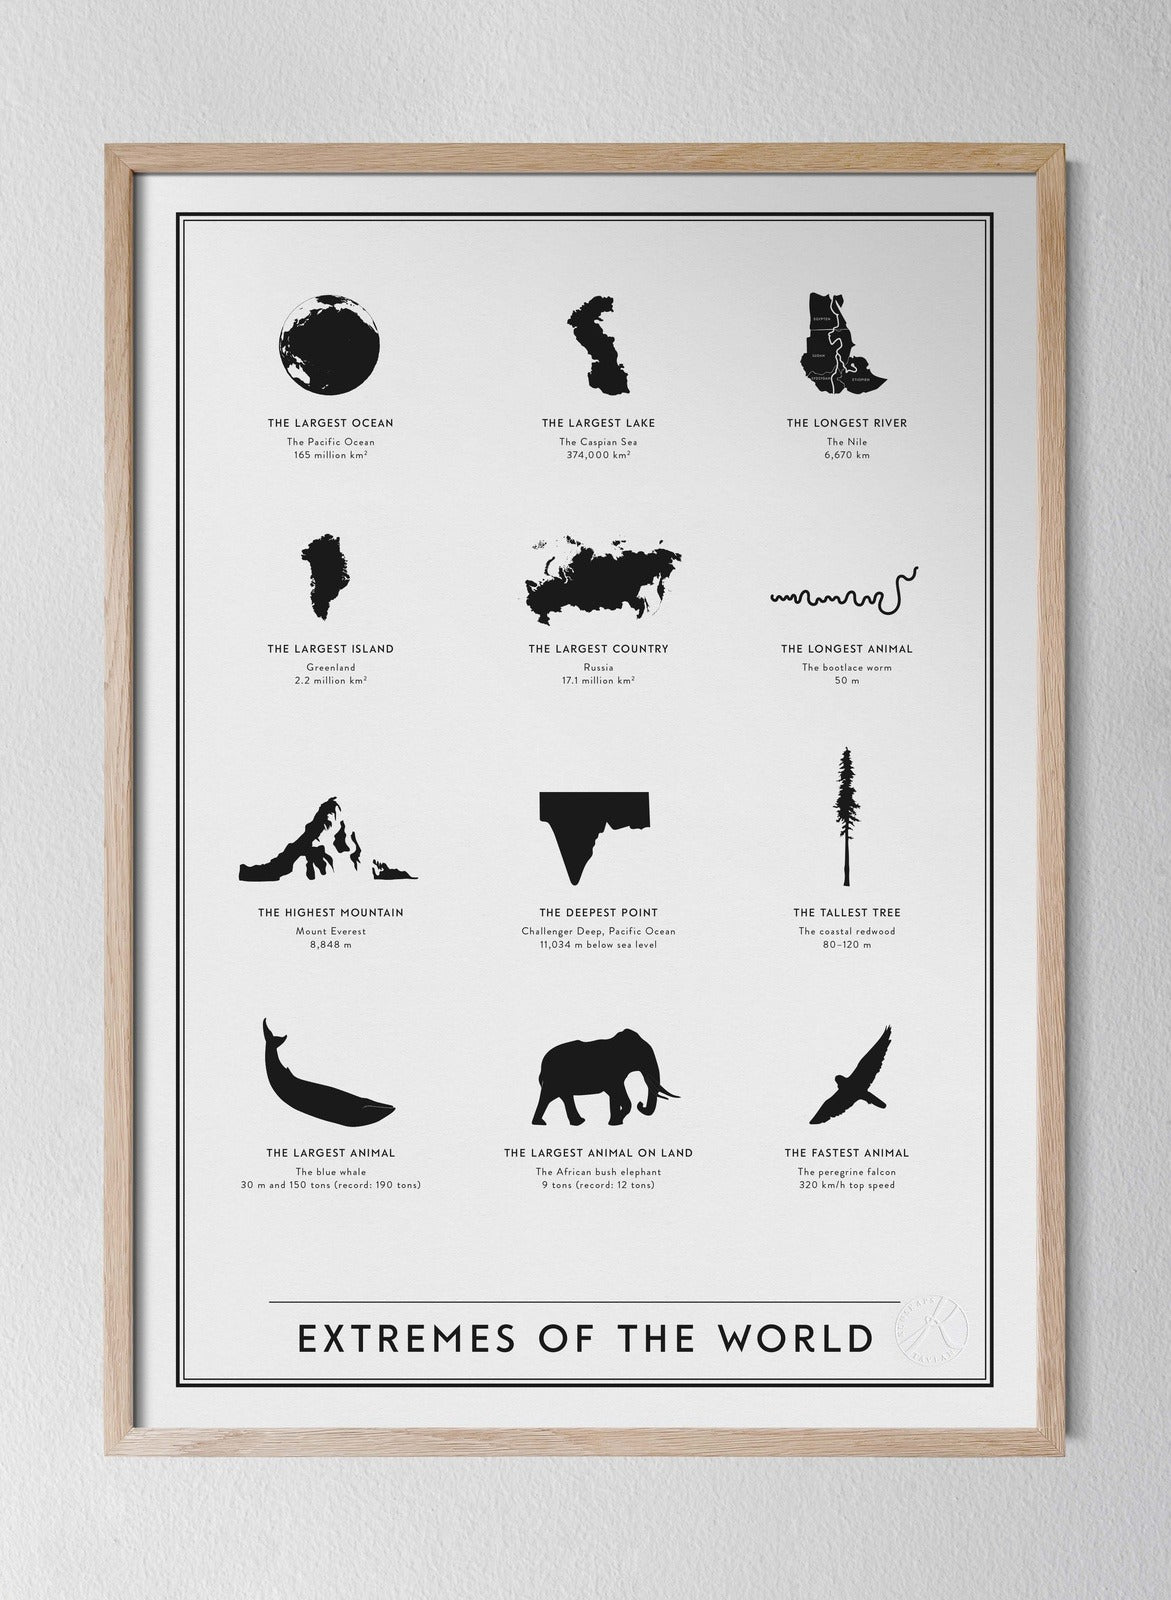 Extremes of the world